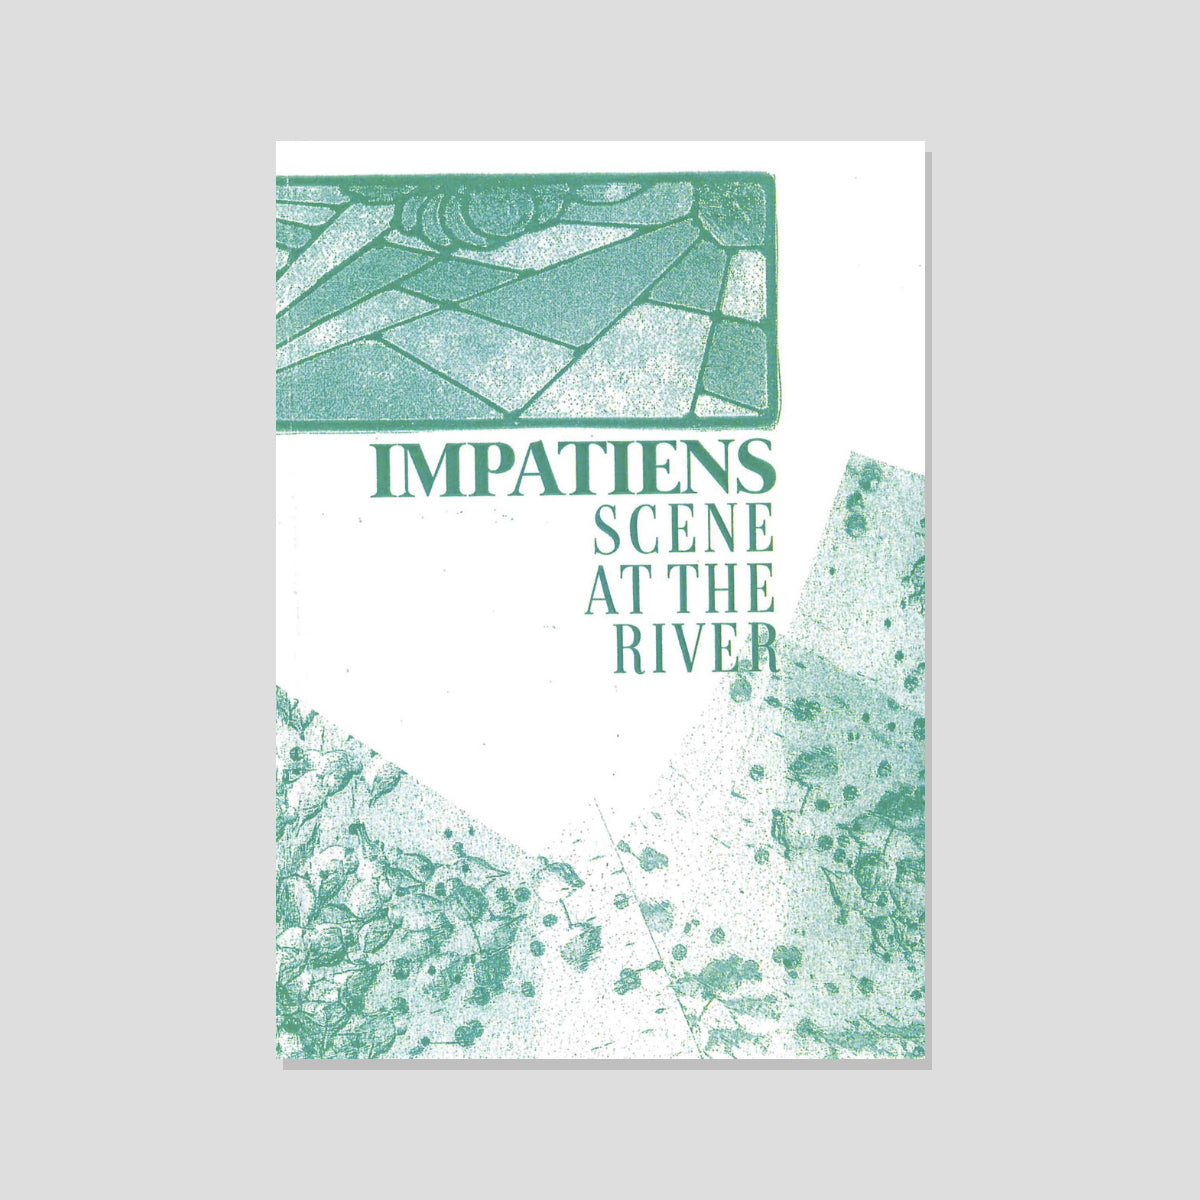 ALTERED STATES TAPES "IMPATIENS - SCENE AT THE RIVER"